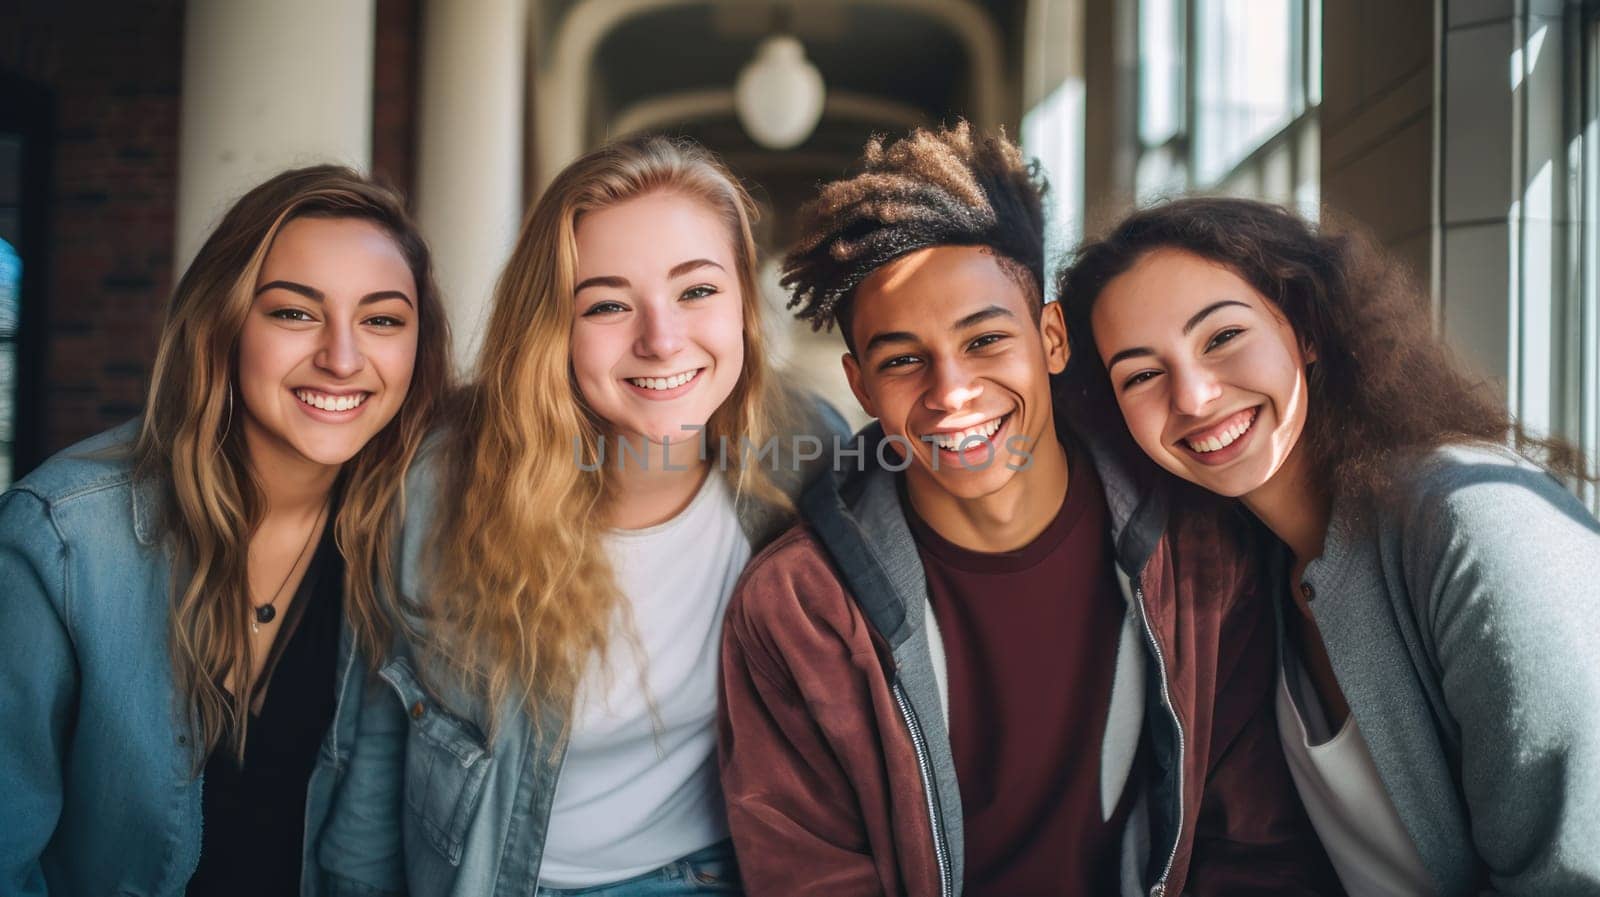 A group of multiracial young people, boys and girls, students of an educational institution smiling. Graduation from college, university or institute. Completing training at a higher educational institution. Master's degree, academic success.